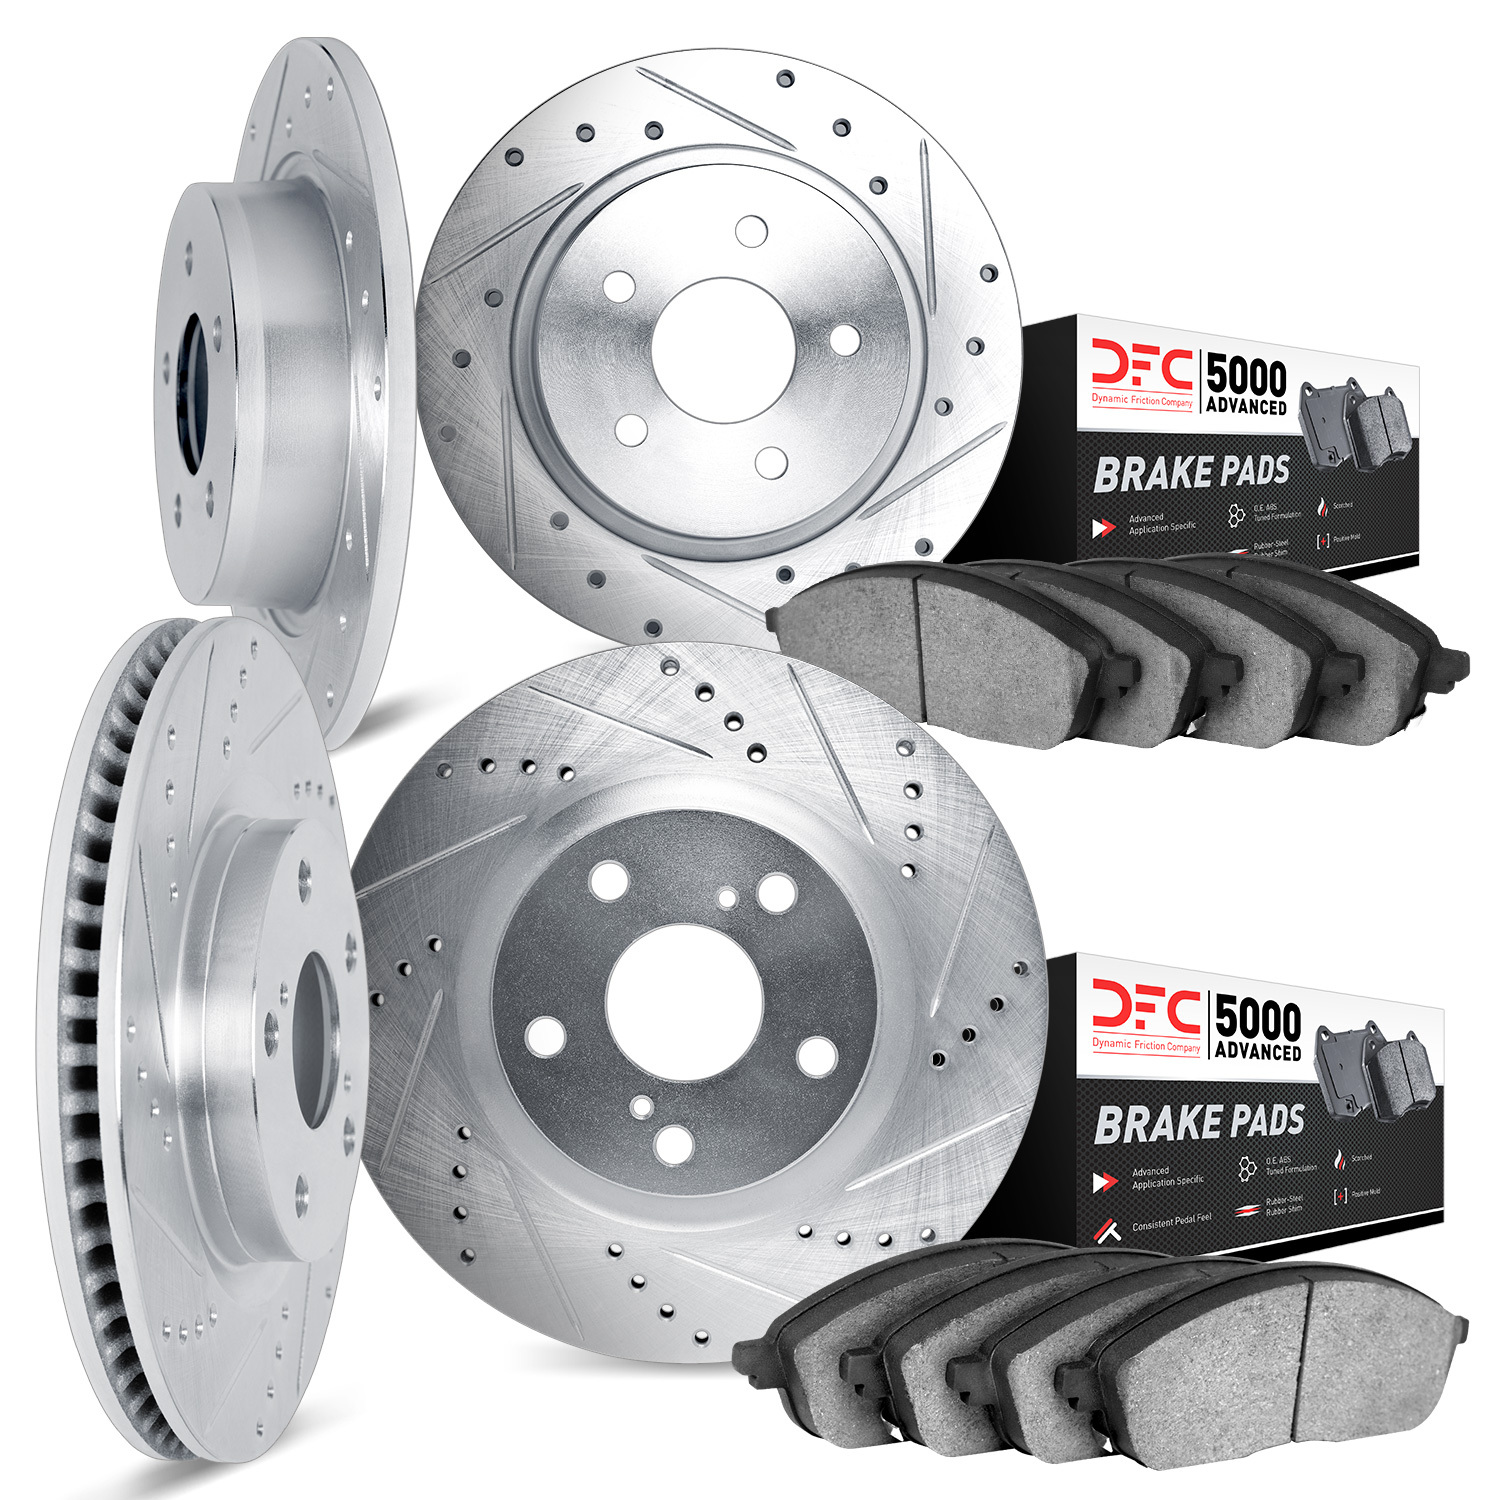 7504-11003 Drilled/Slotted Brake Rotors w/5000 Advanced Brake Pads Kit [Silver], 1990-1995 Land Rover, Position: Front and Rear